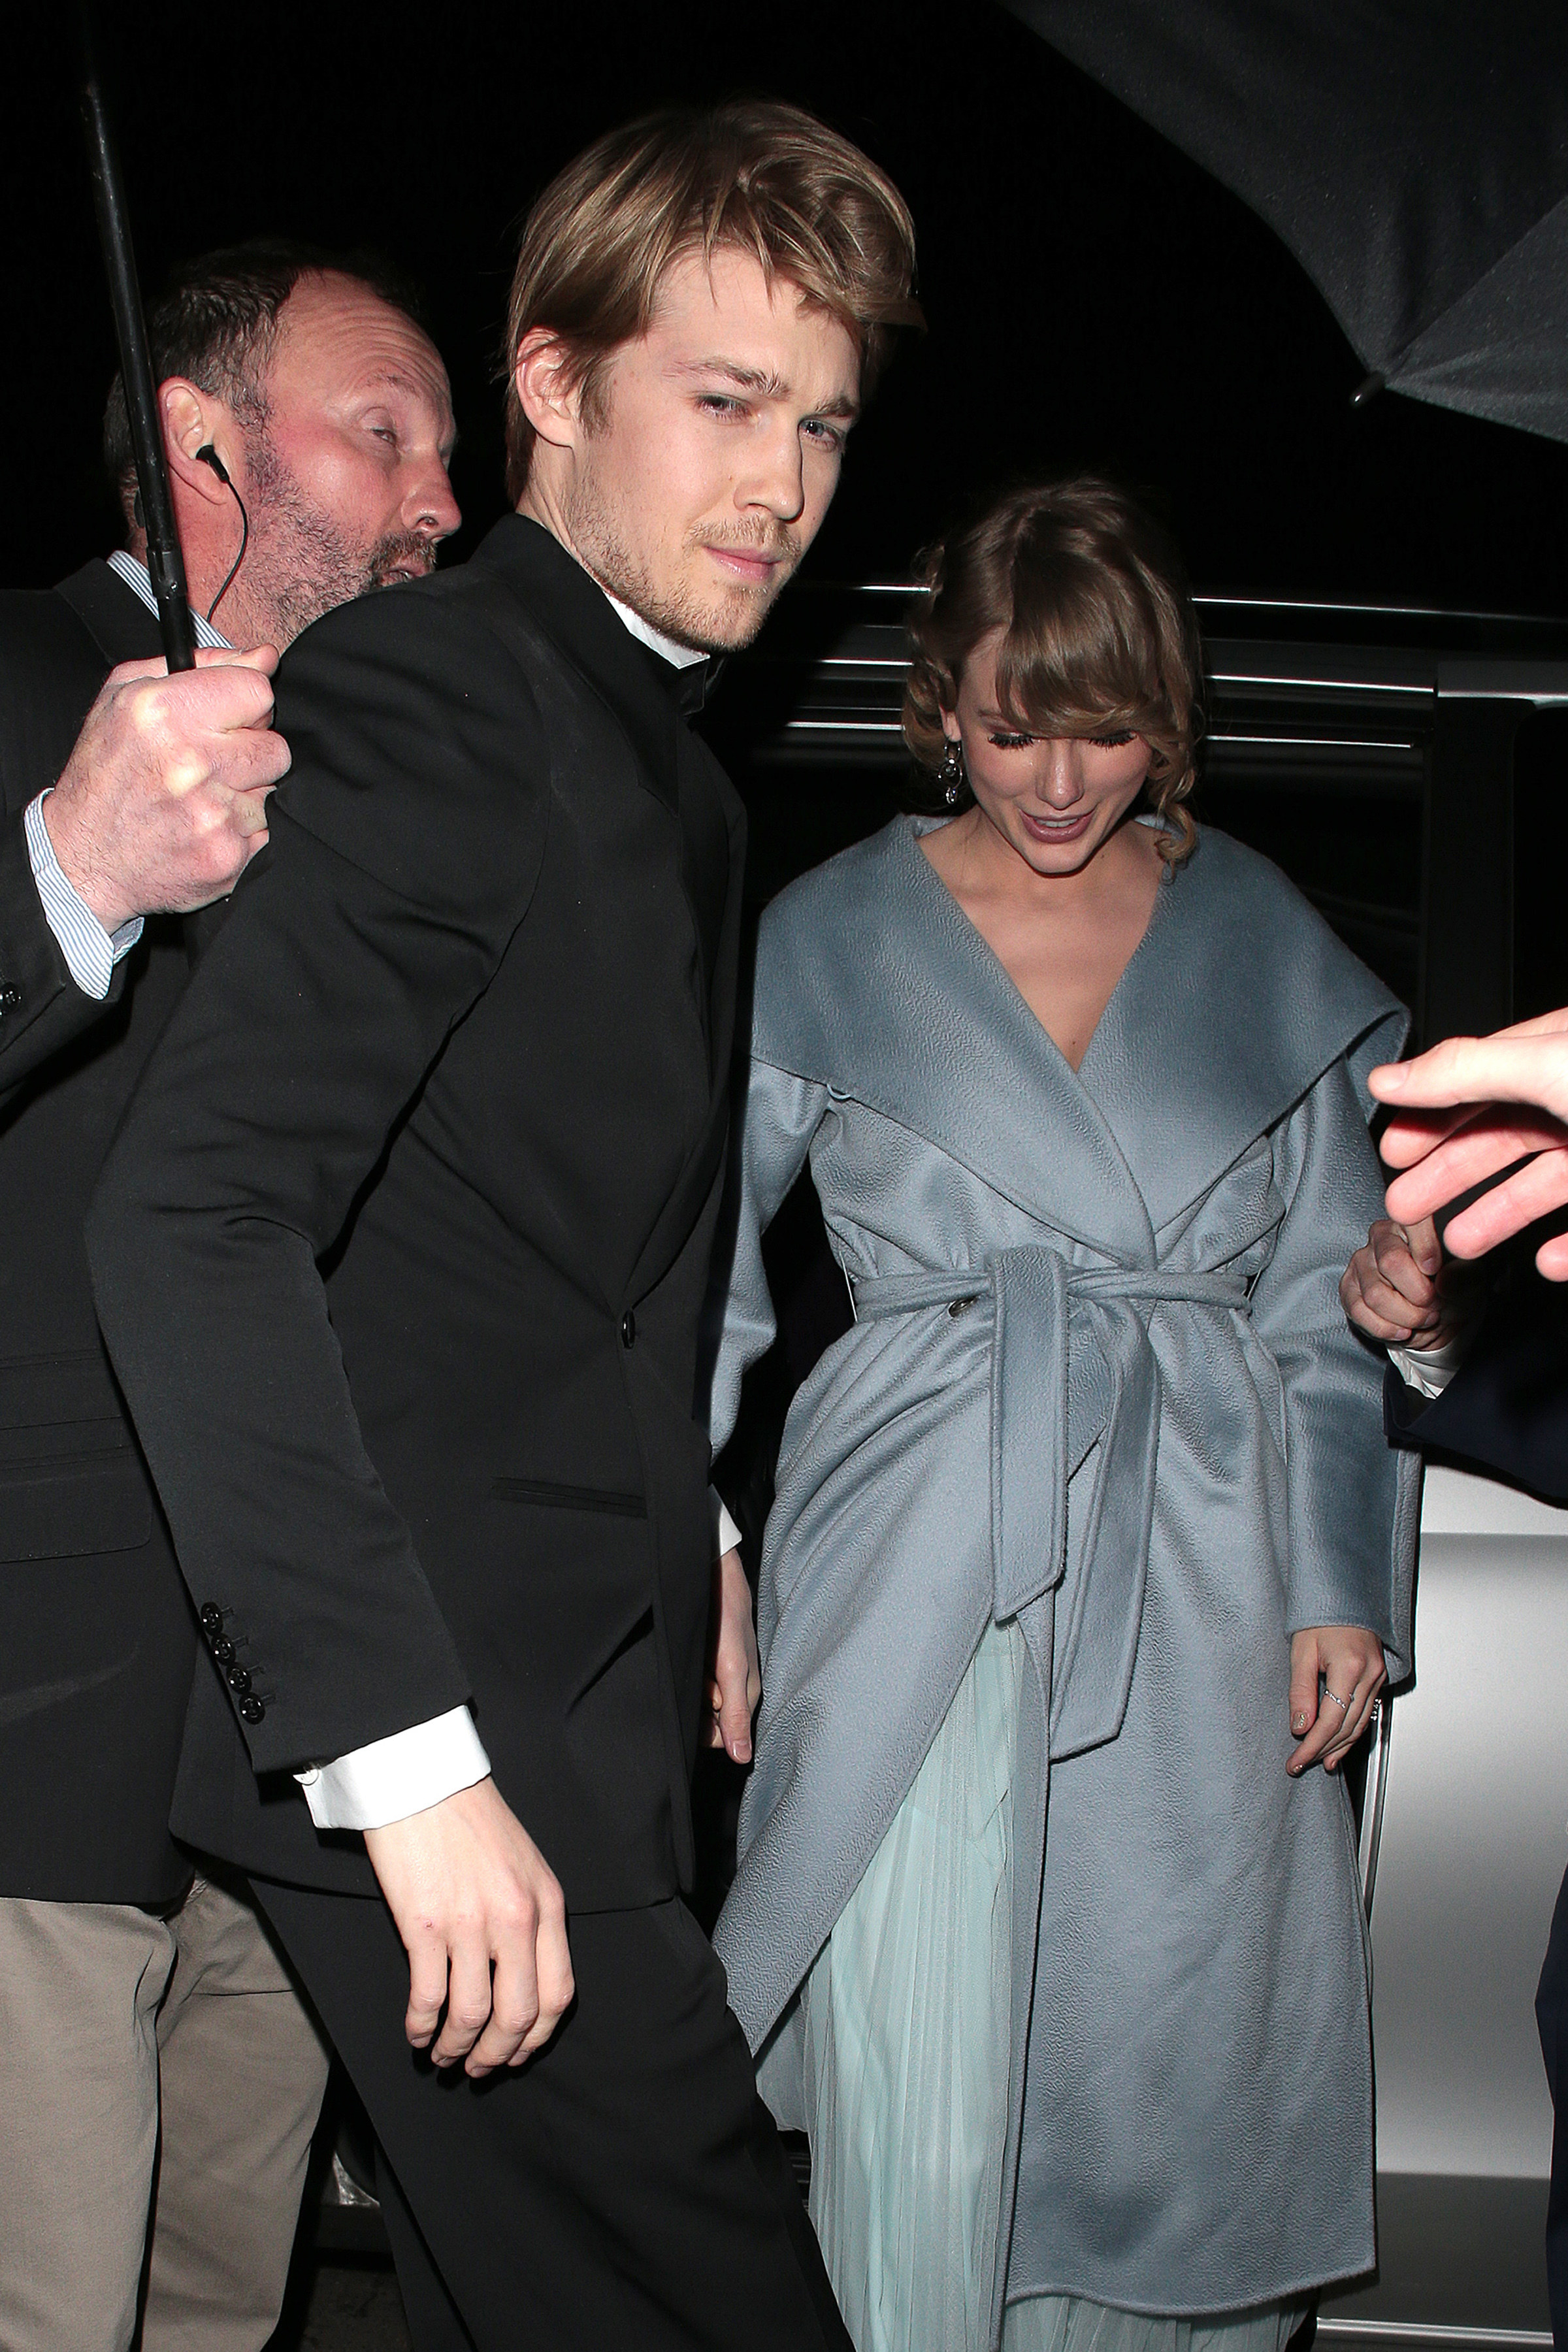 Joe helping Taylor out of a car